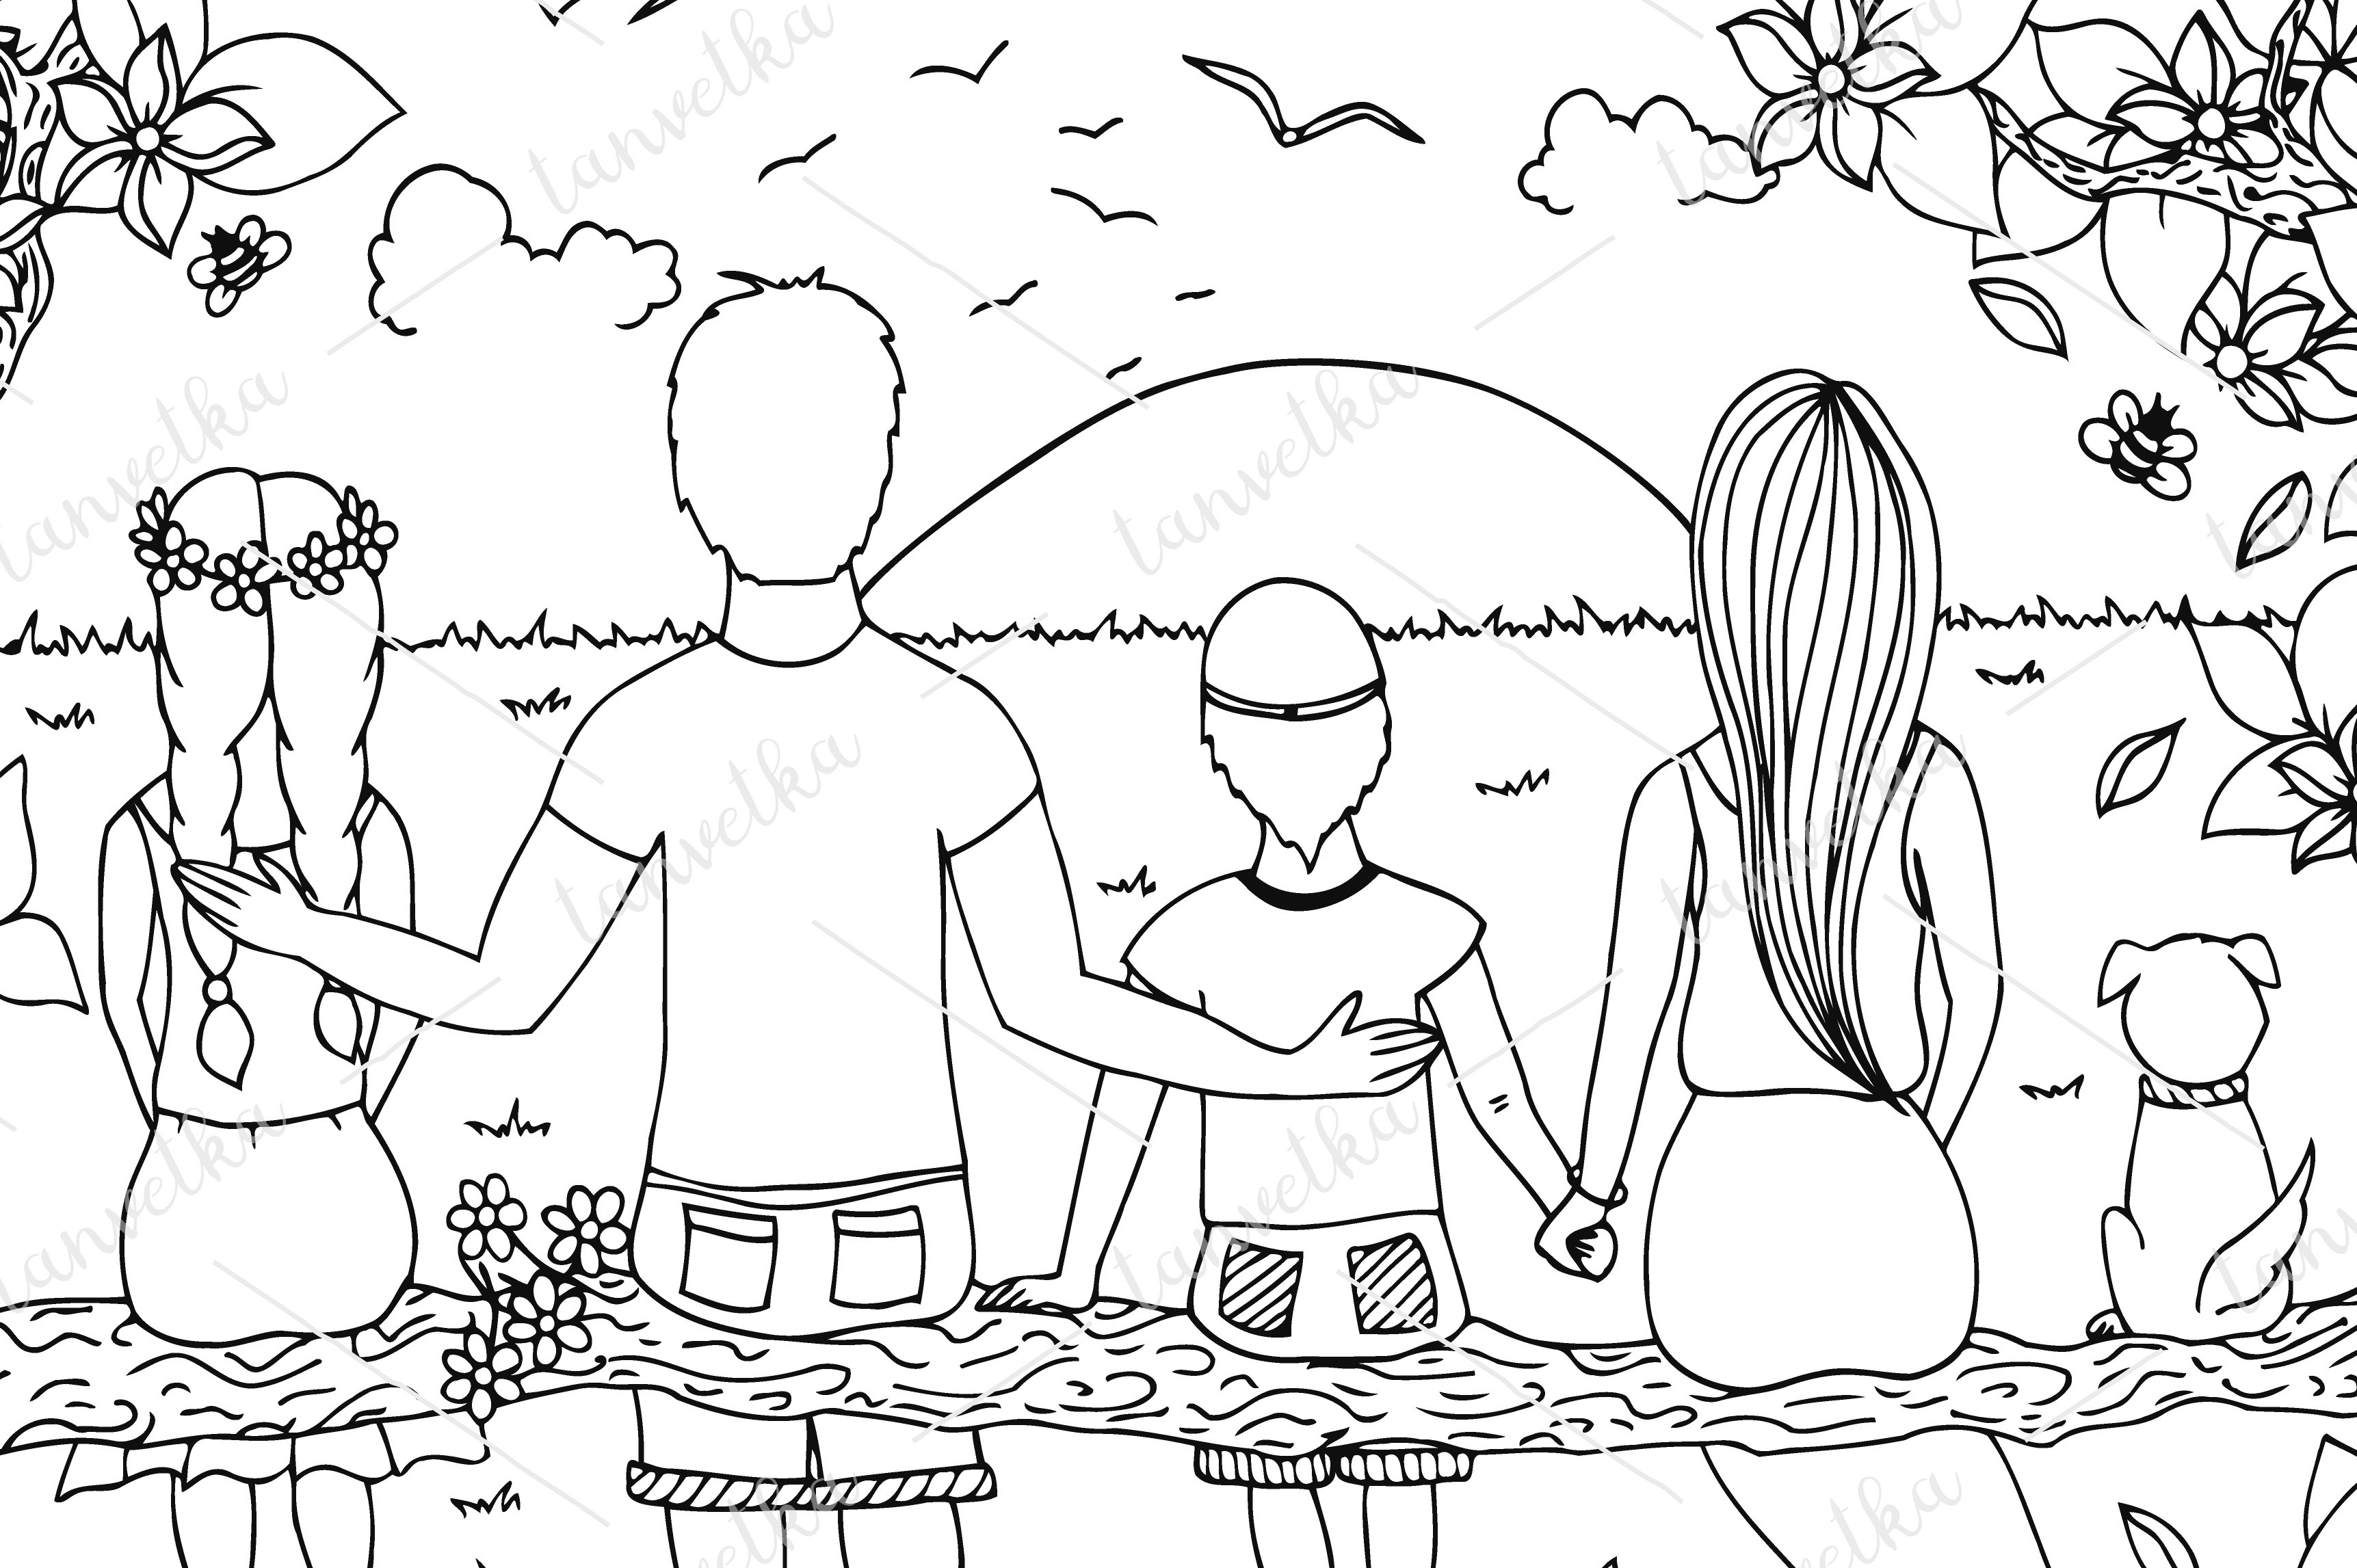 Doodle family watching the sunset preview image.